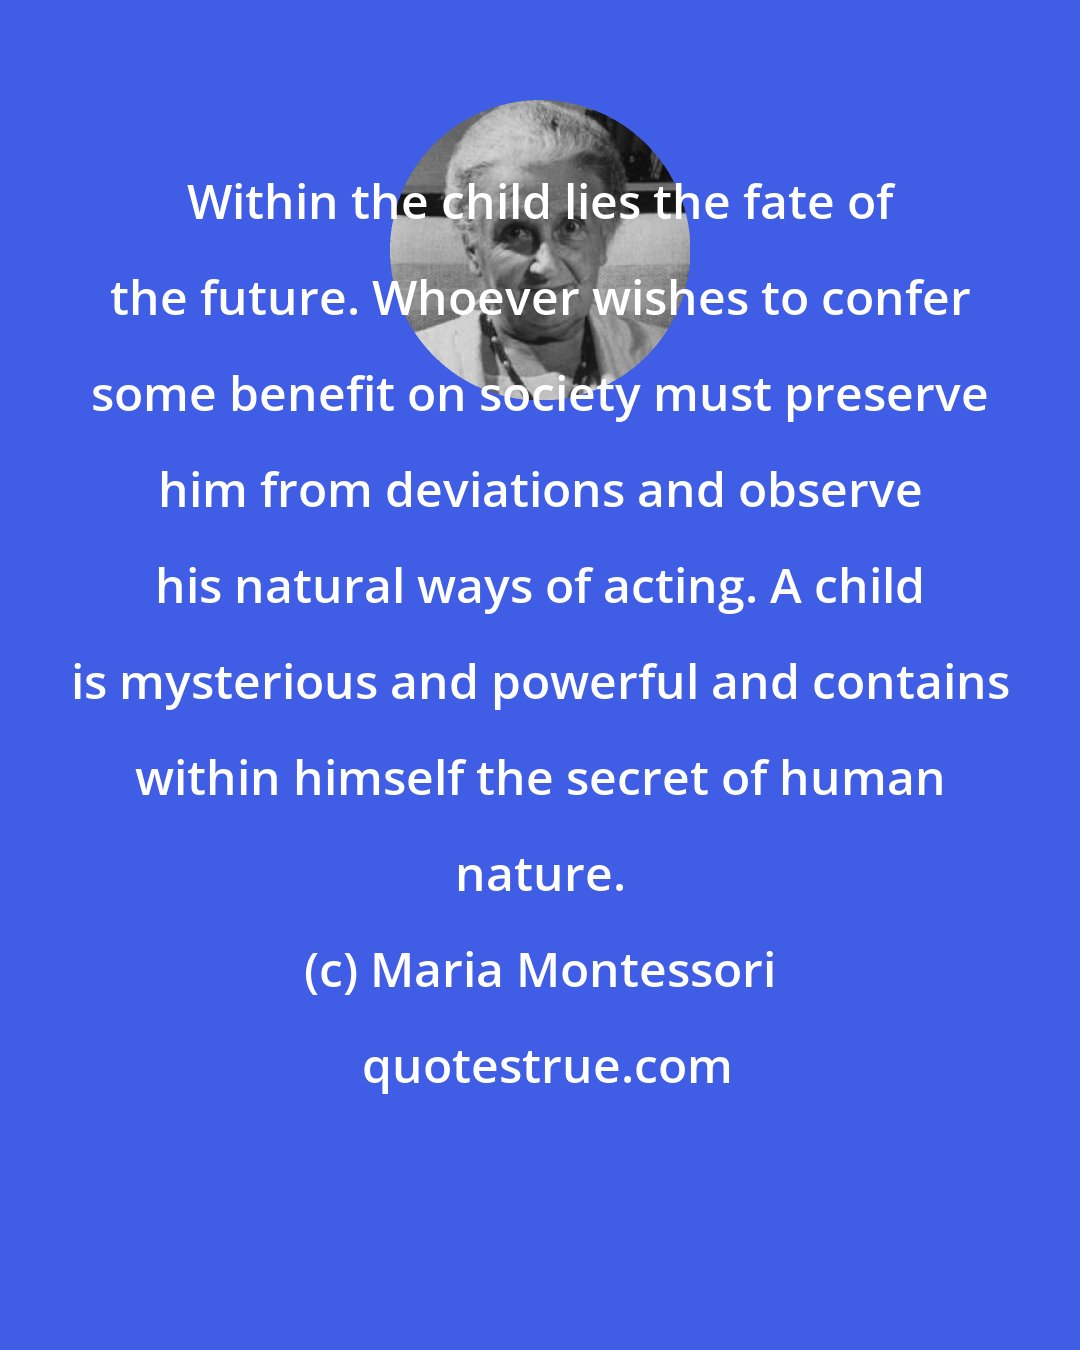 Maria Montessori: Within the child lies the fate of the future. Whoever wishes to confer some benefit on society must preserve him from deviations and observe his natural ways of acting. A child is mysterious and powerful and contains within himself the secret of human nature.